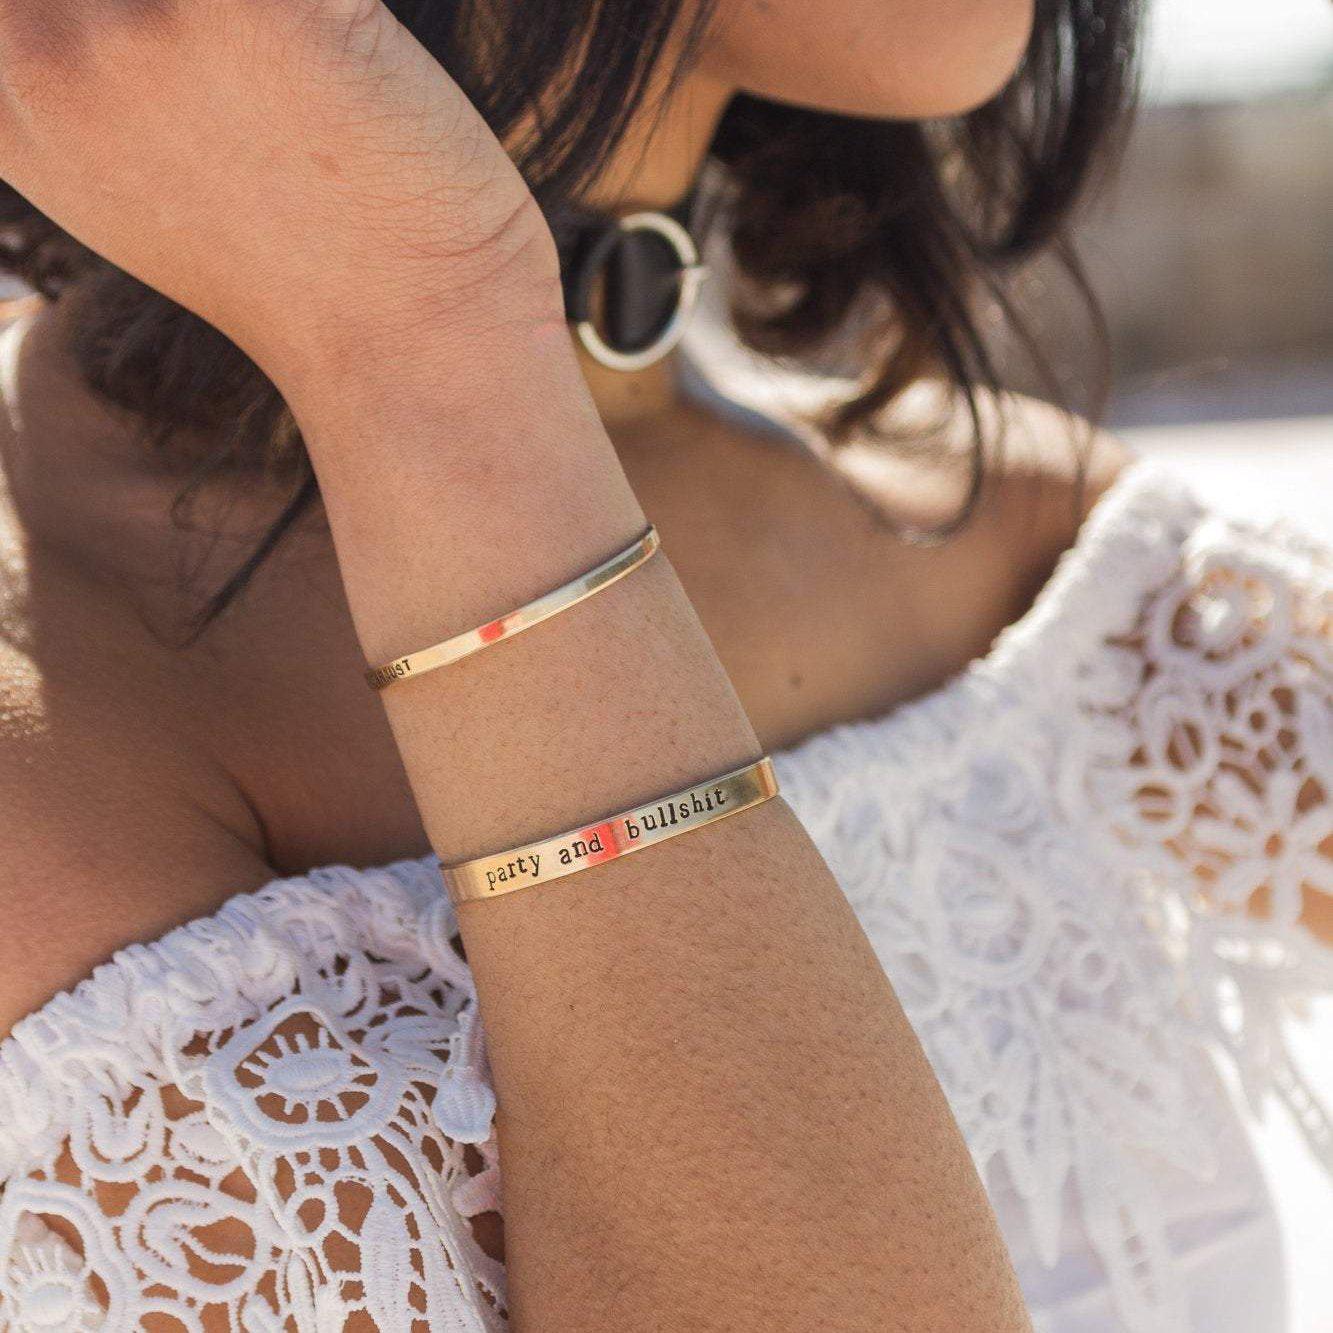 LIVING THE DREAM Stacking Cuff Bracelet Salt and Sparkle